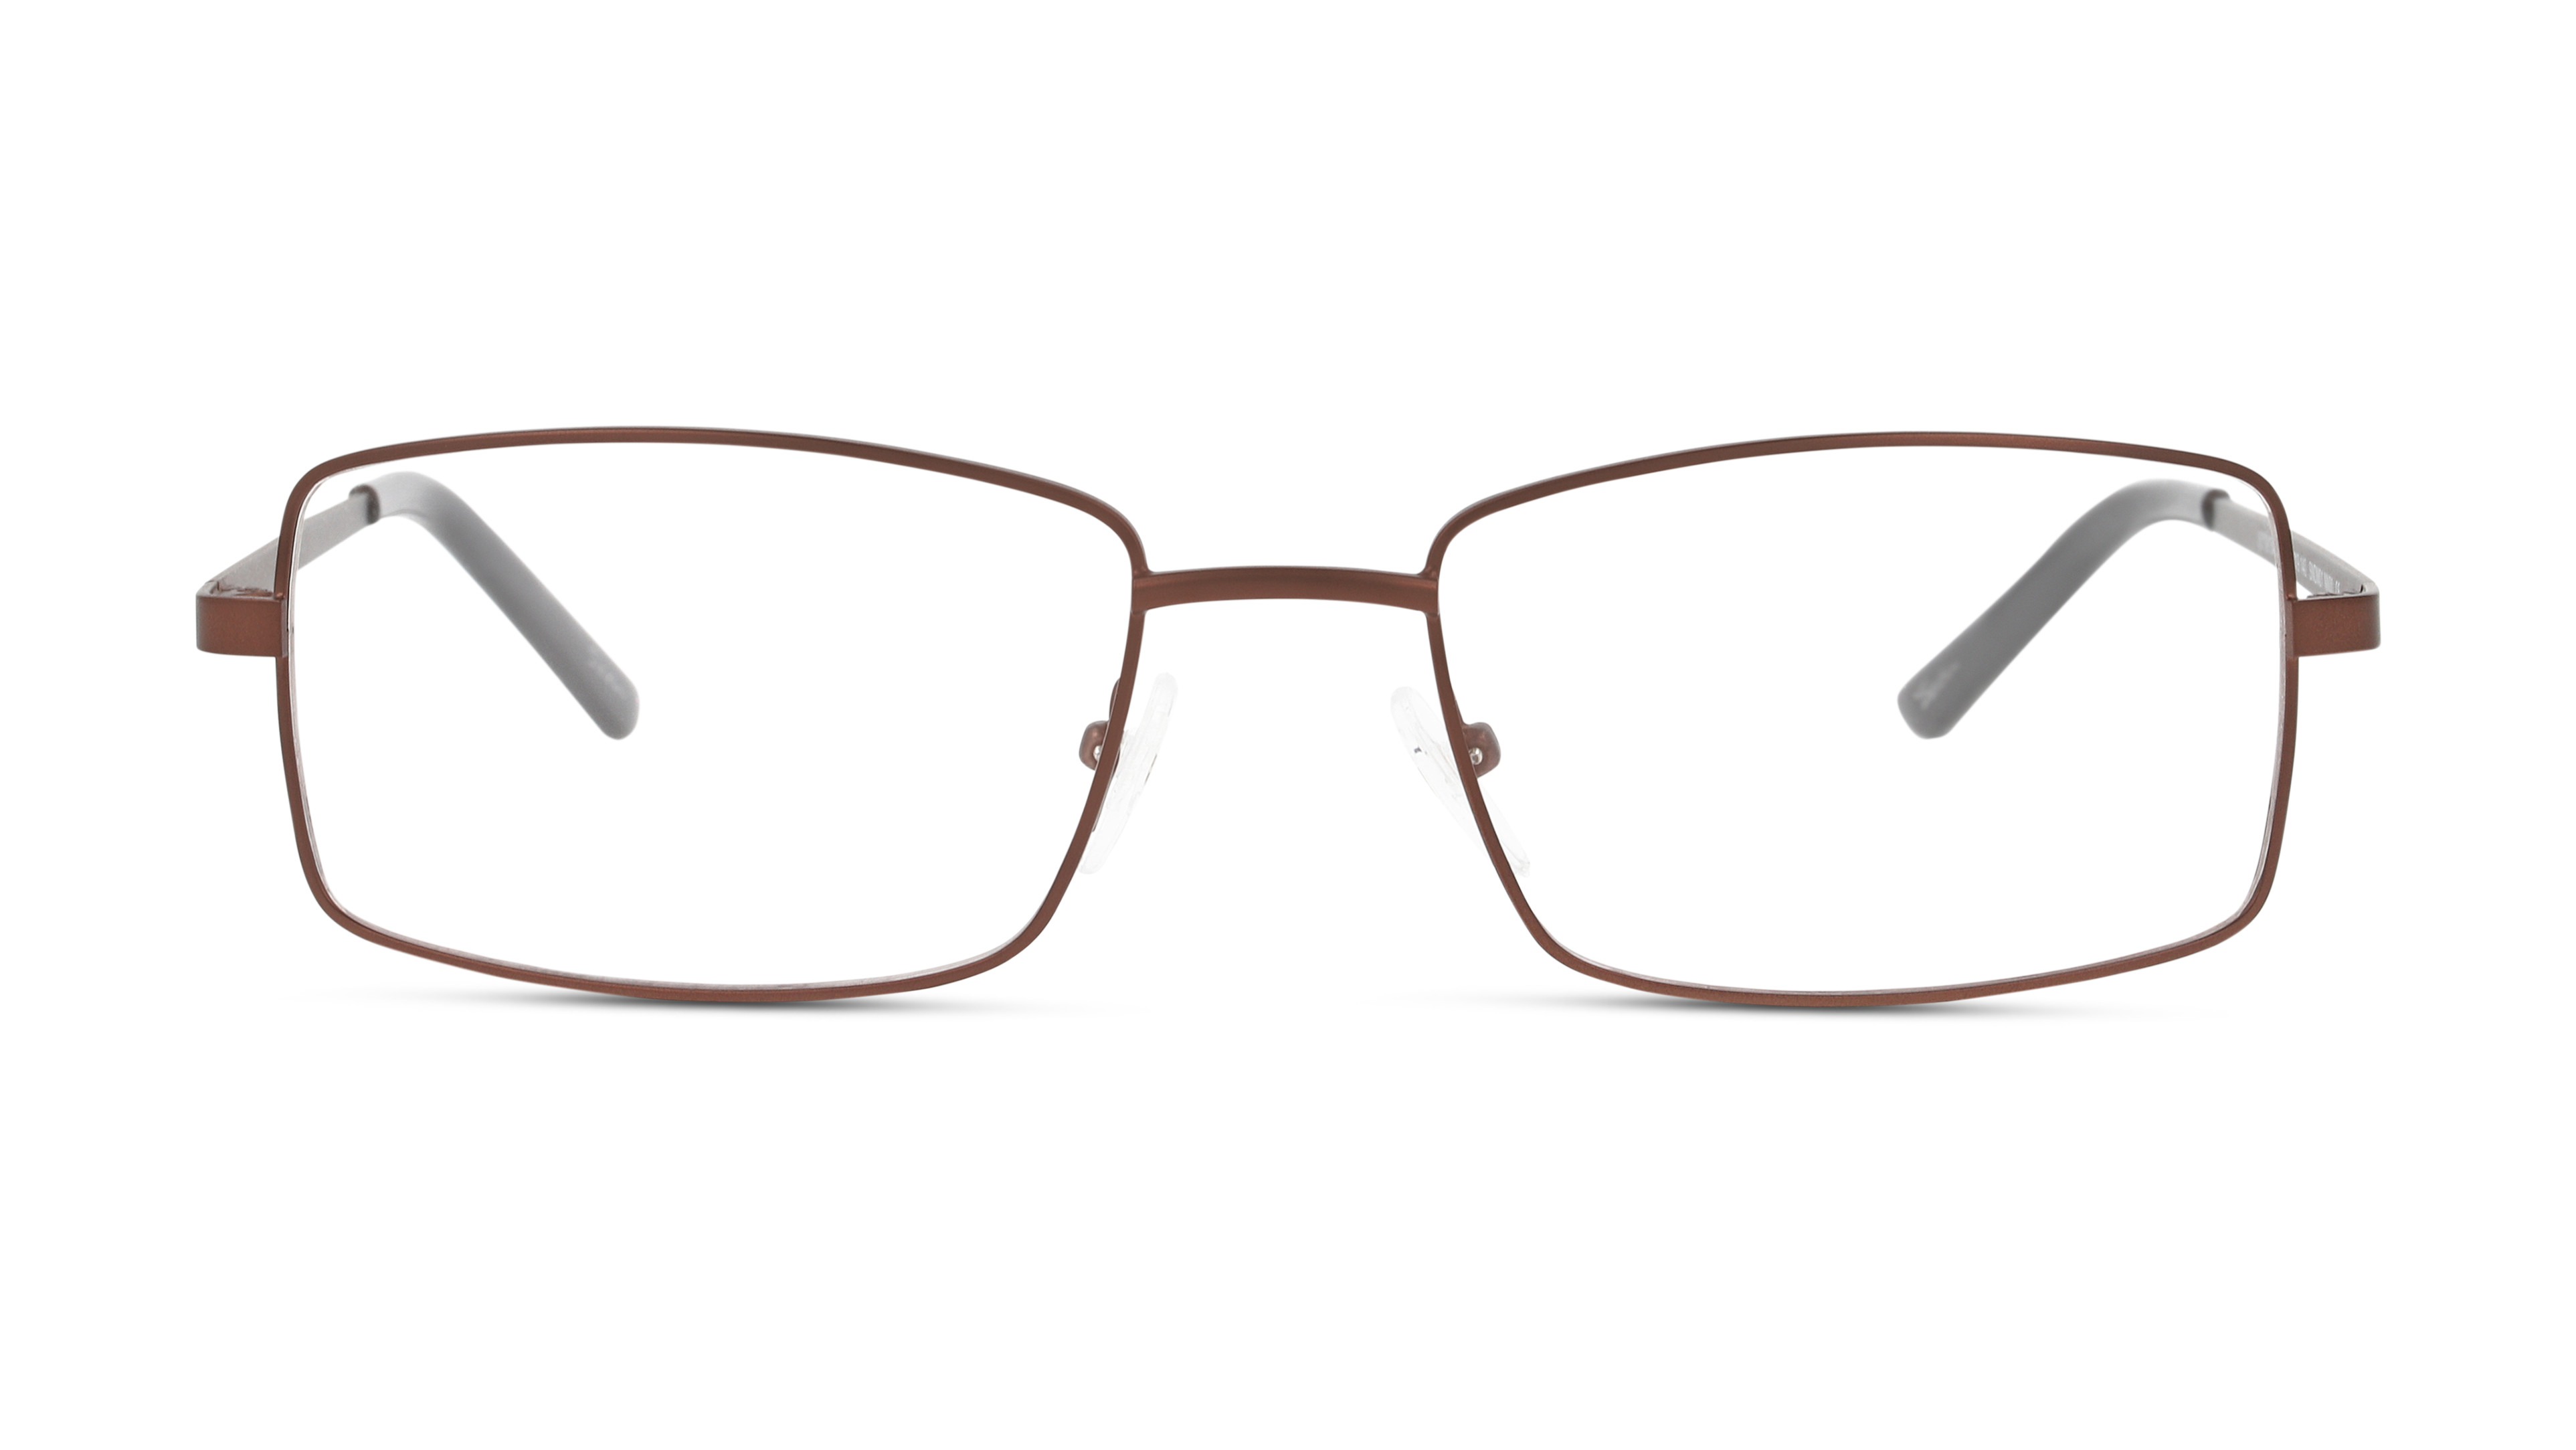 [products.image.front] Seen SNDM01 NN00 Brille